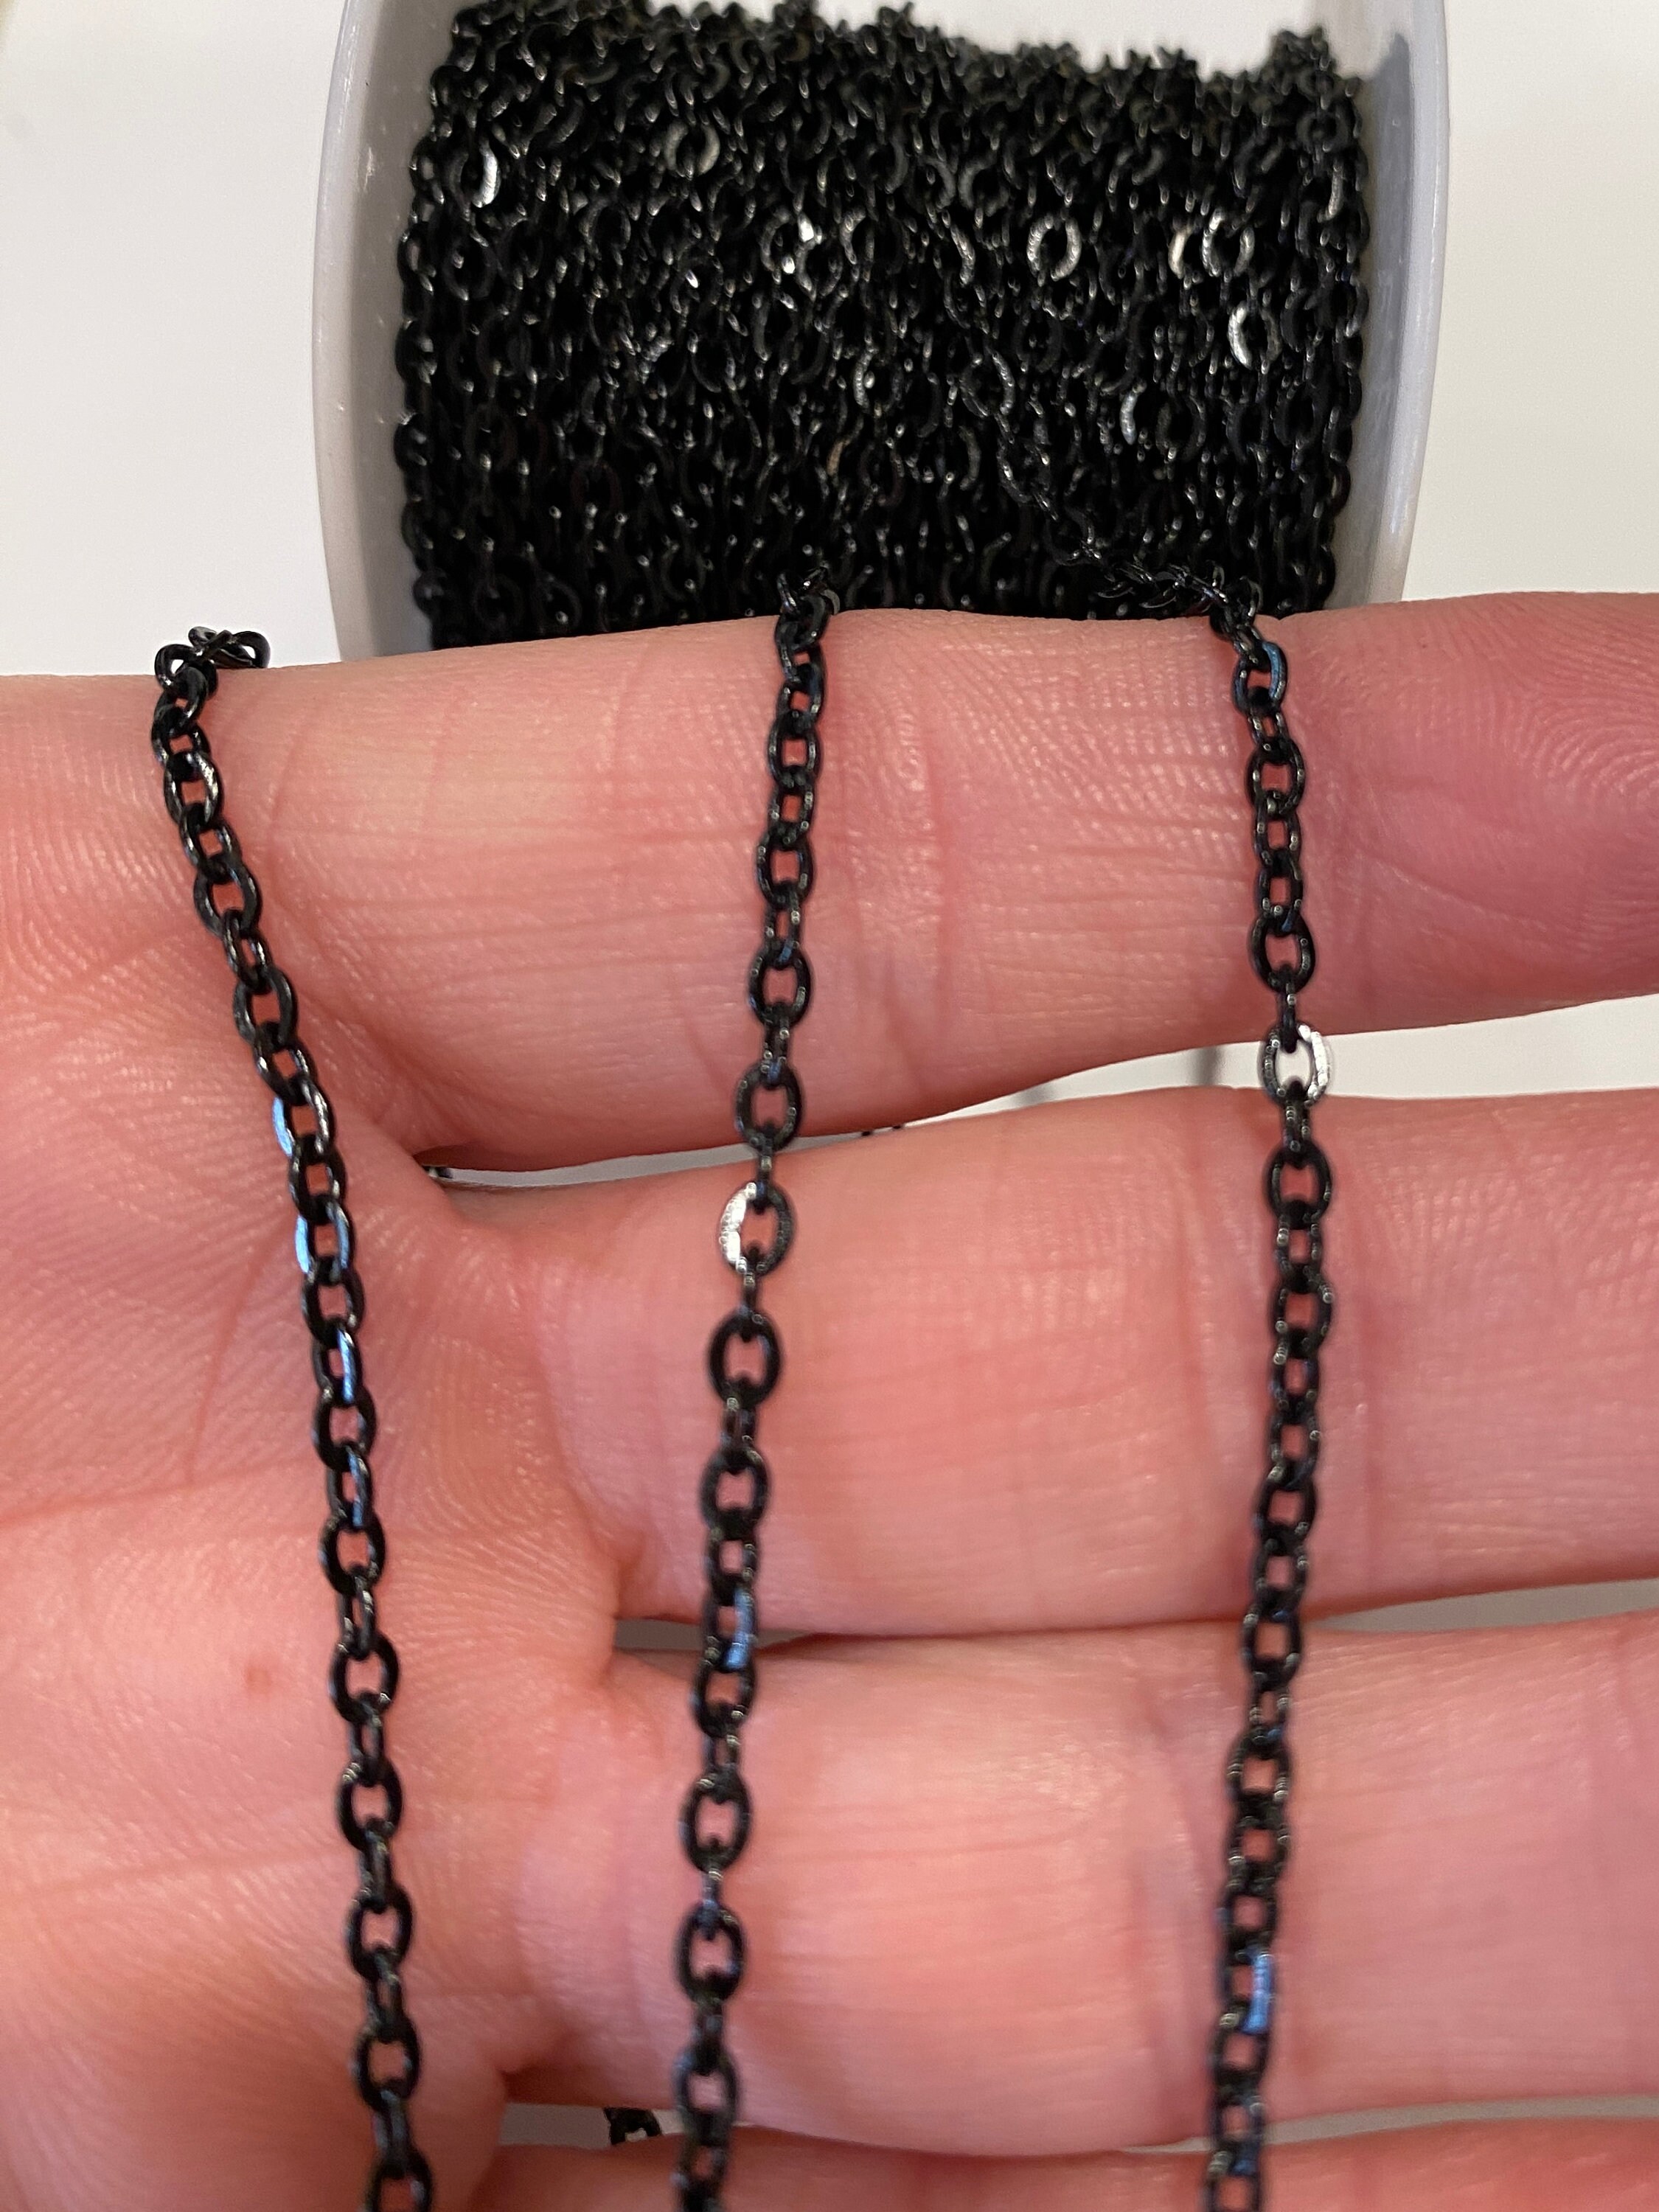 2 Shiny Black Nite Extension Chain, Jewelry Extender Chain, Bracelet,  Necklace, Curb, Extender 